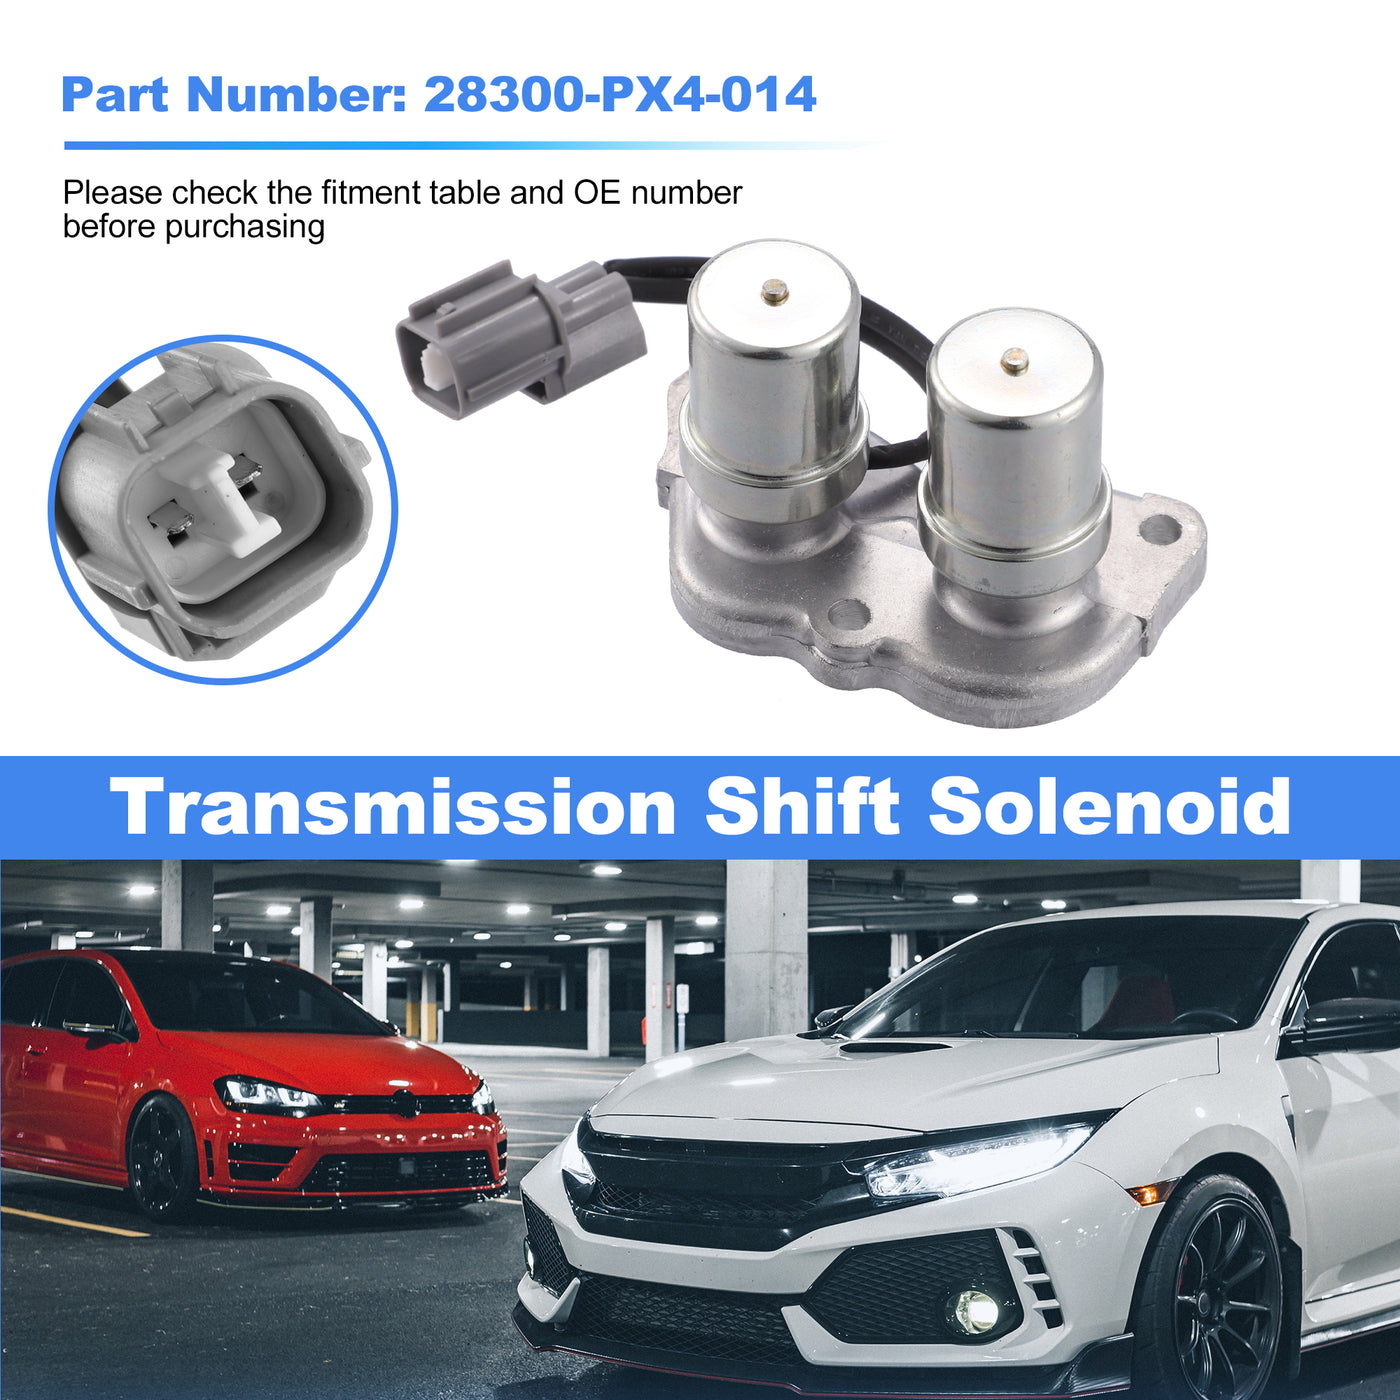 X AUTOHAUX 28300-PX4-014 Transmission Shift Solenoid for Honda Accord 1990-1997 for Honda Prelude 1992-1993